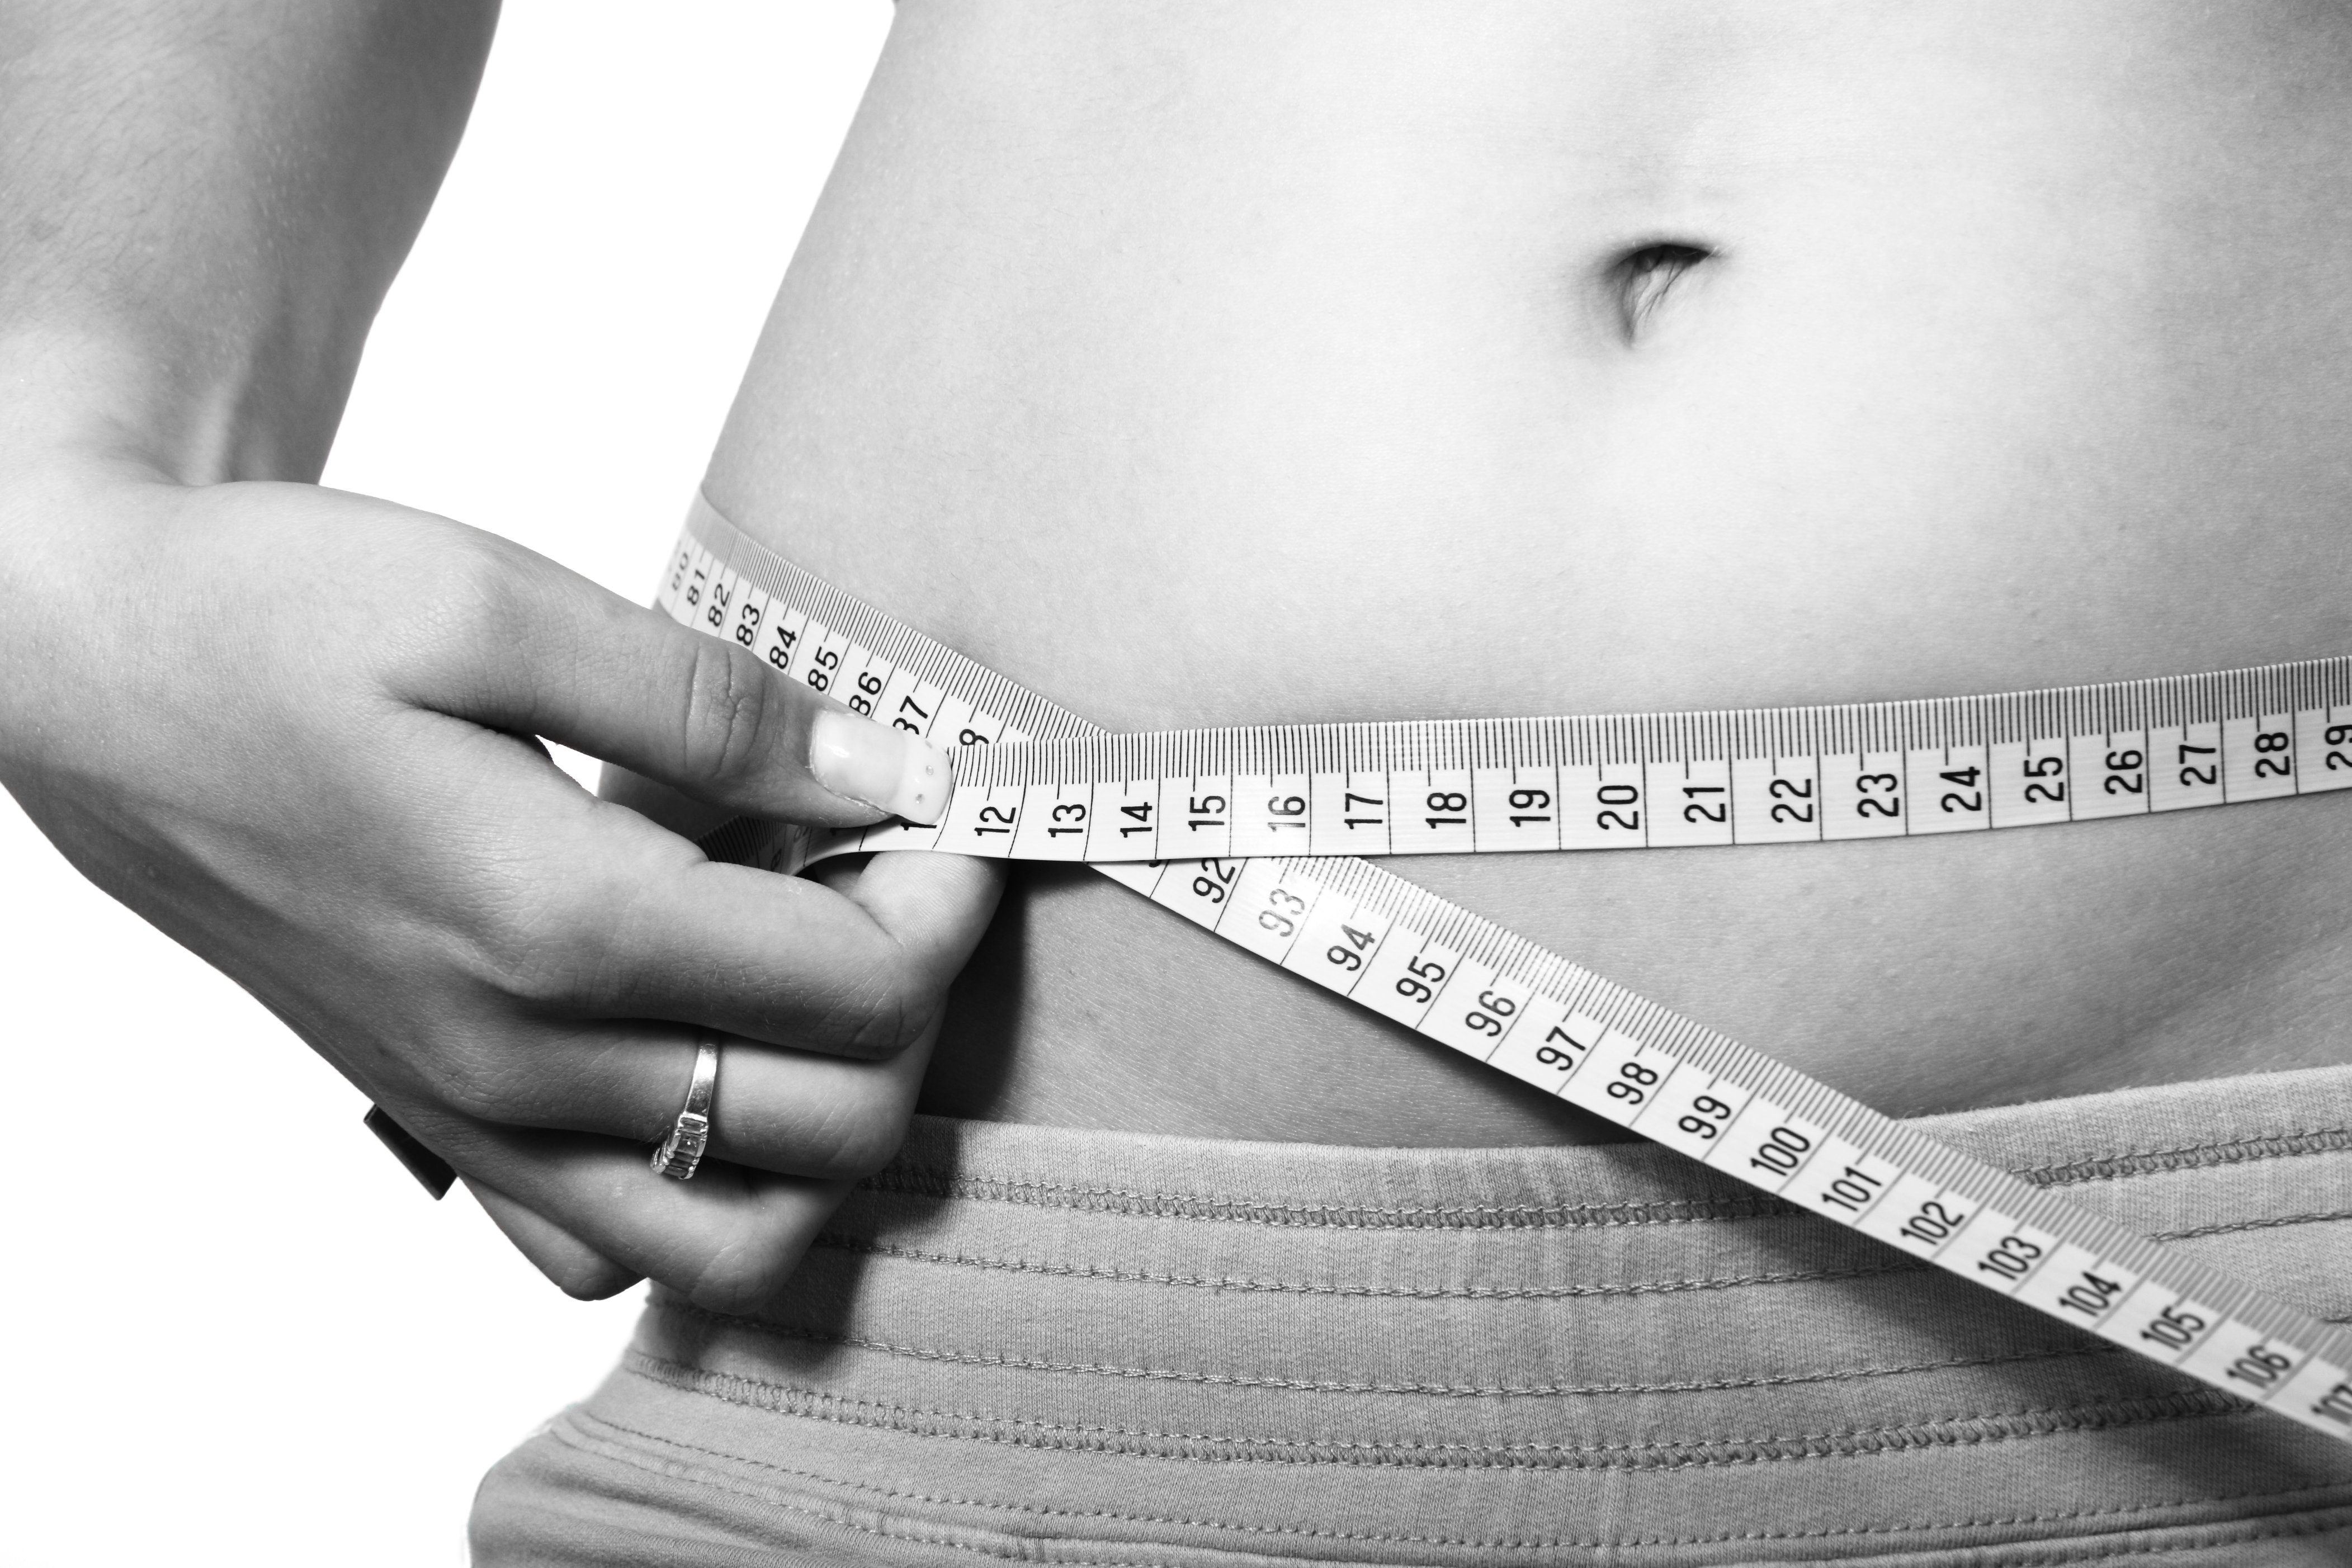 Weight loss: Another unexpectedly awesome benefit of giving up drinking by Daisy Steele